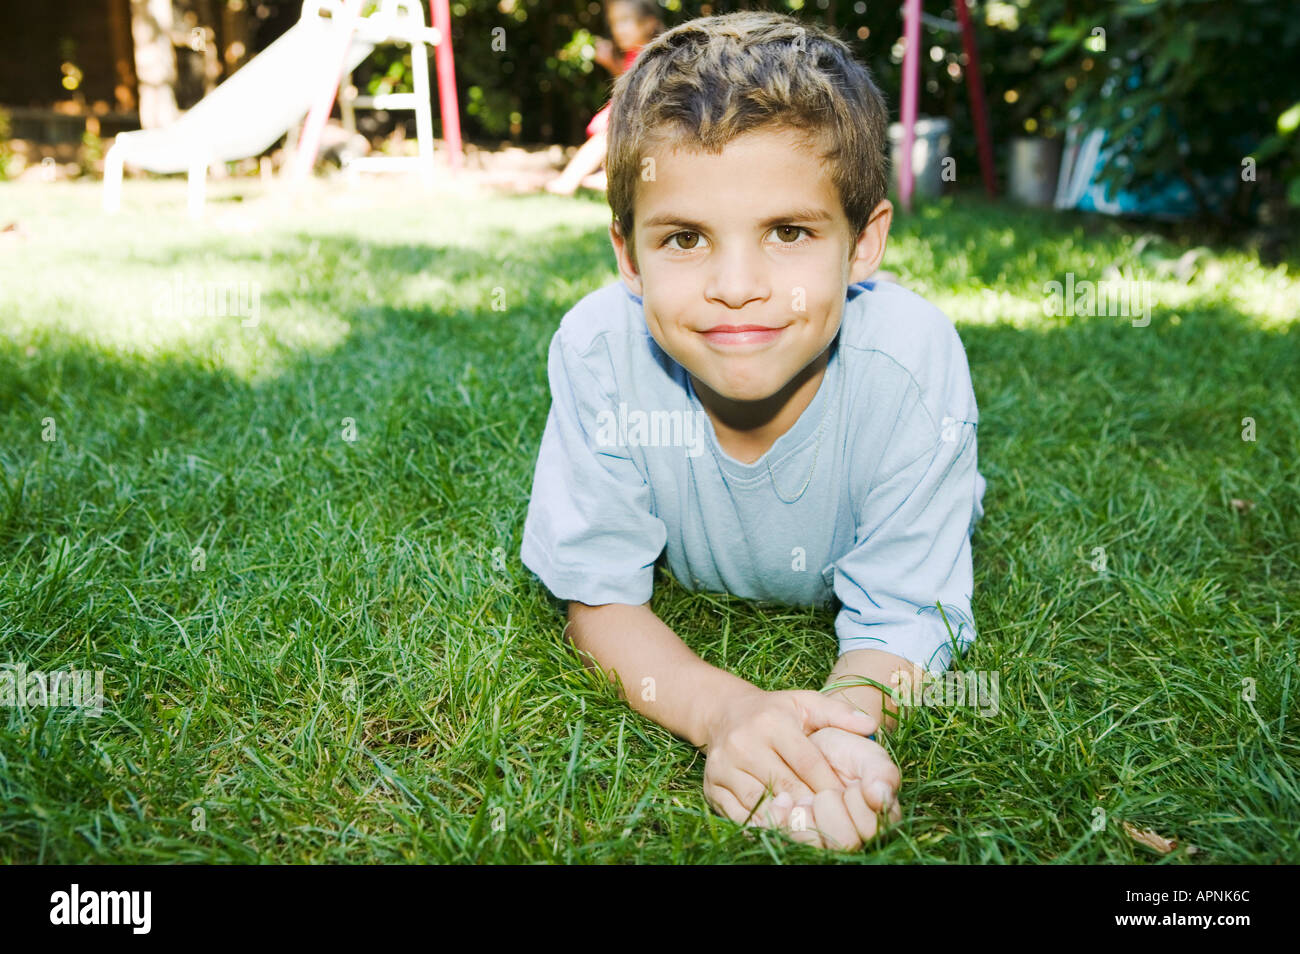 Smiling boy laying on grass lawn Stock Photo